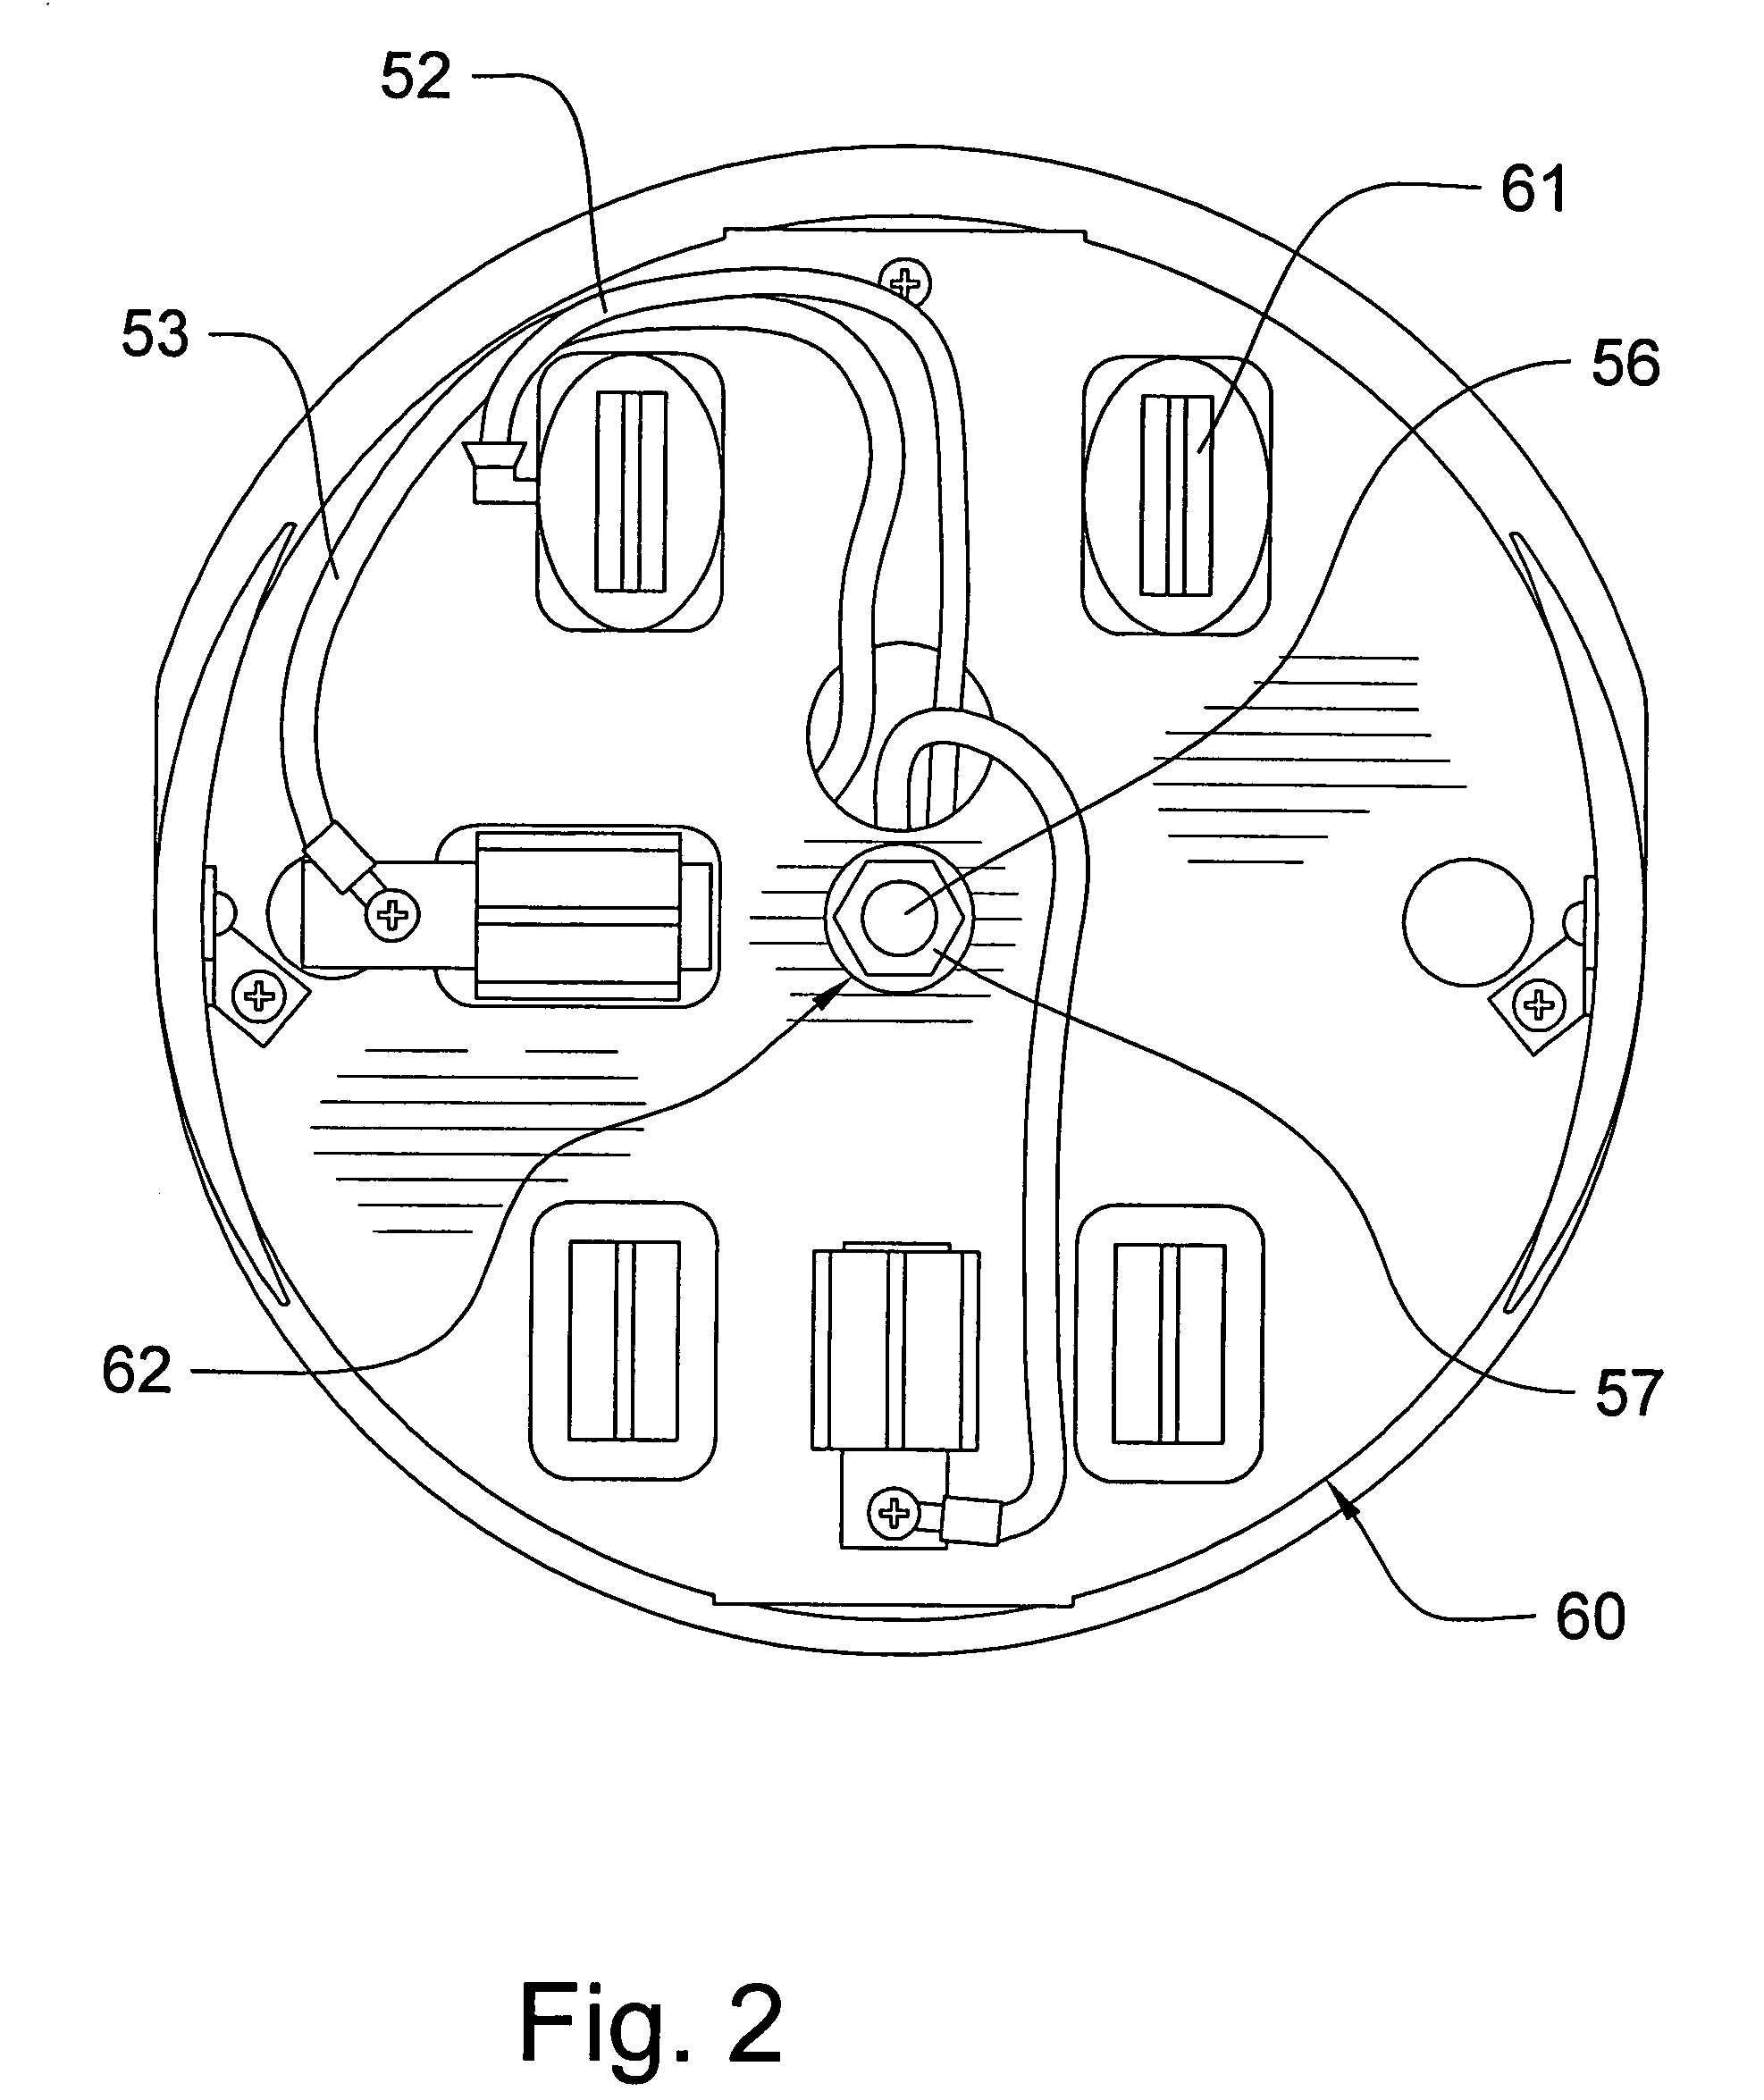 Method and system for improving the operational safety, reliability, and functionality of electrical power consumption monitoring devices